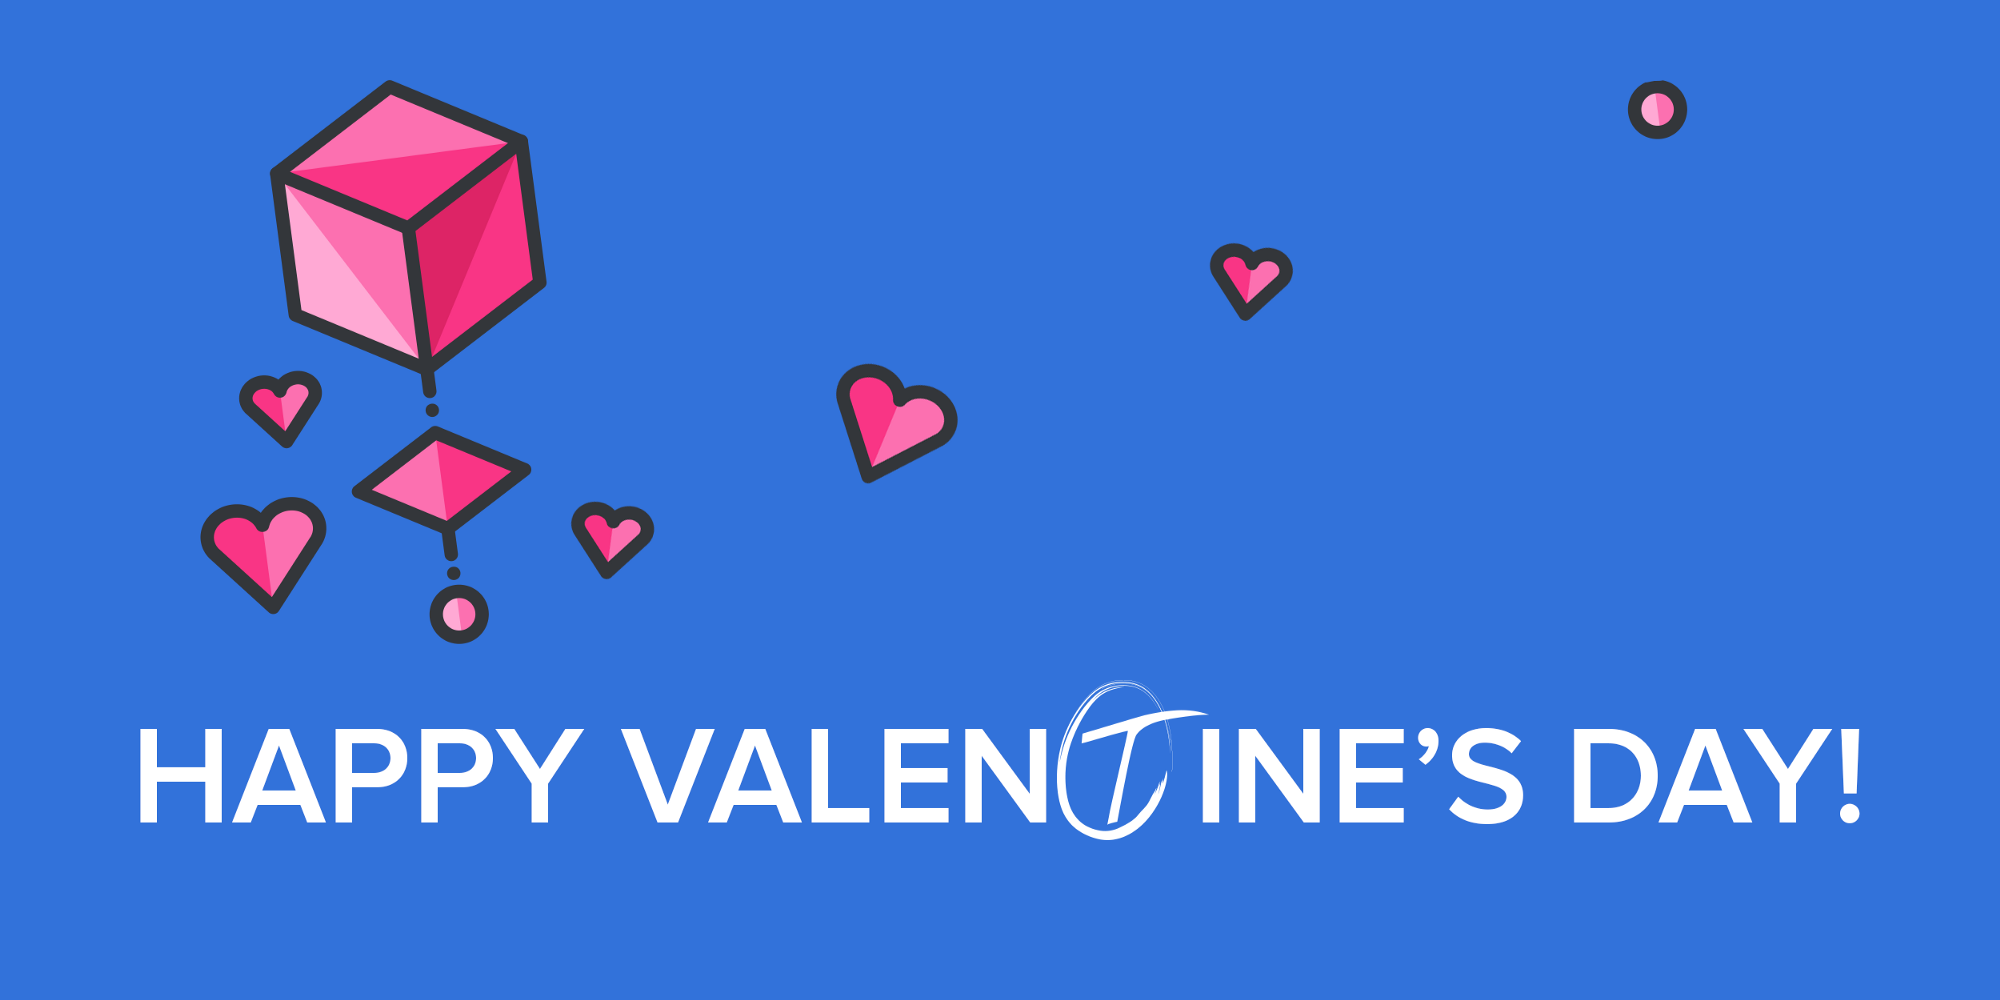 A graphic with a blue background. In the foreground are pink hearts and cubes, and white text saying "Happy Valentine's Day!"